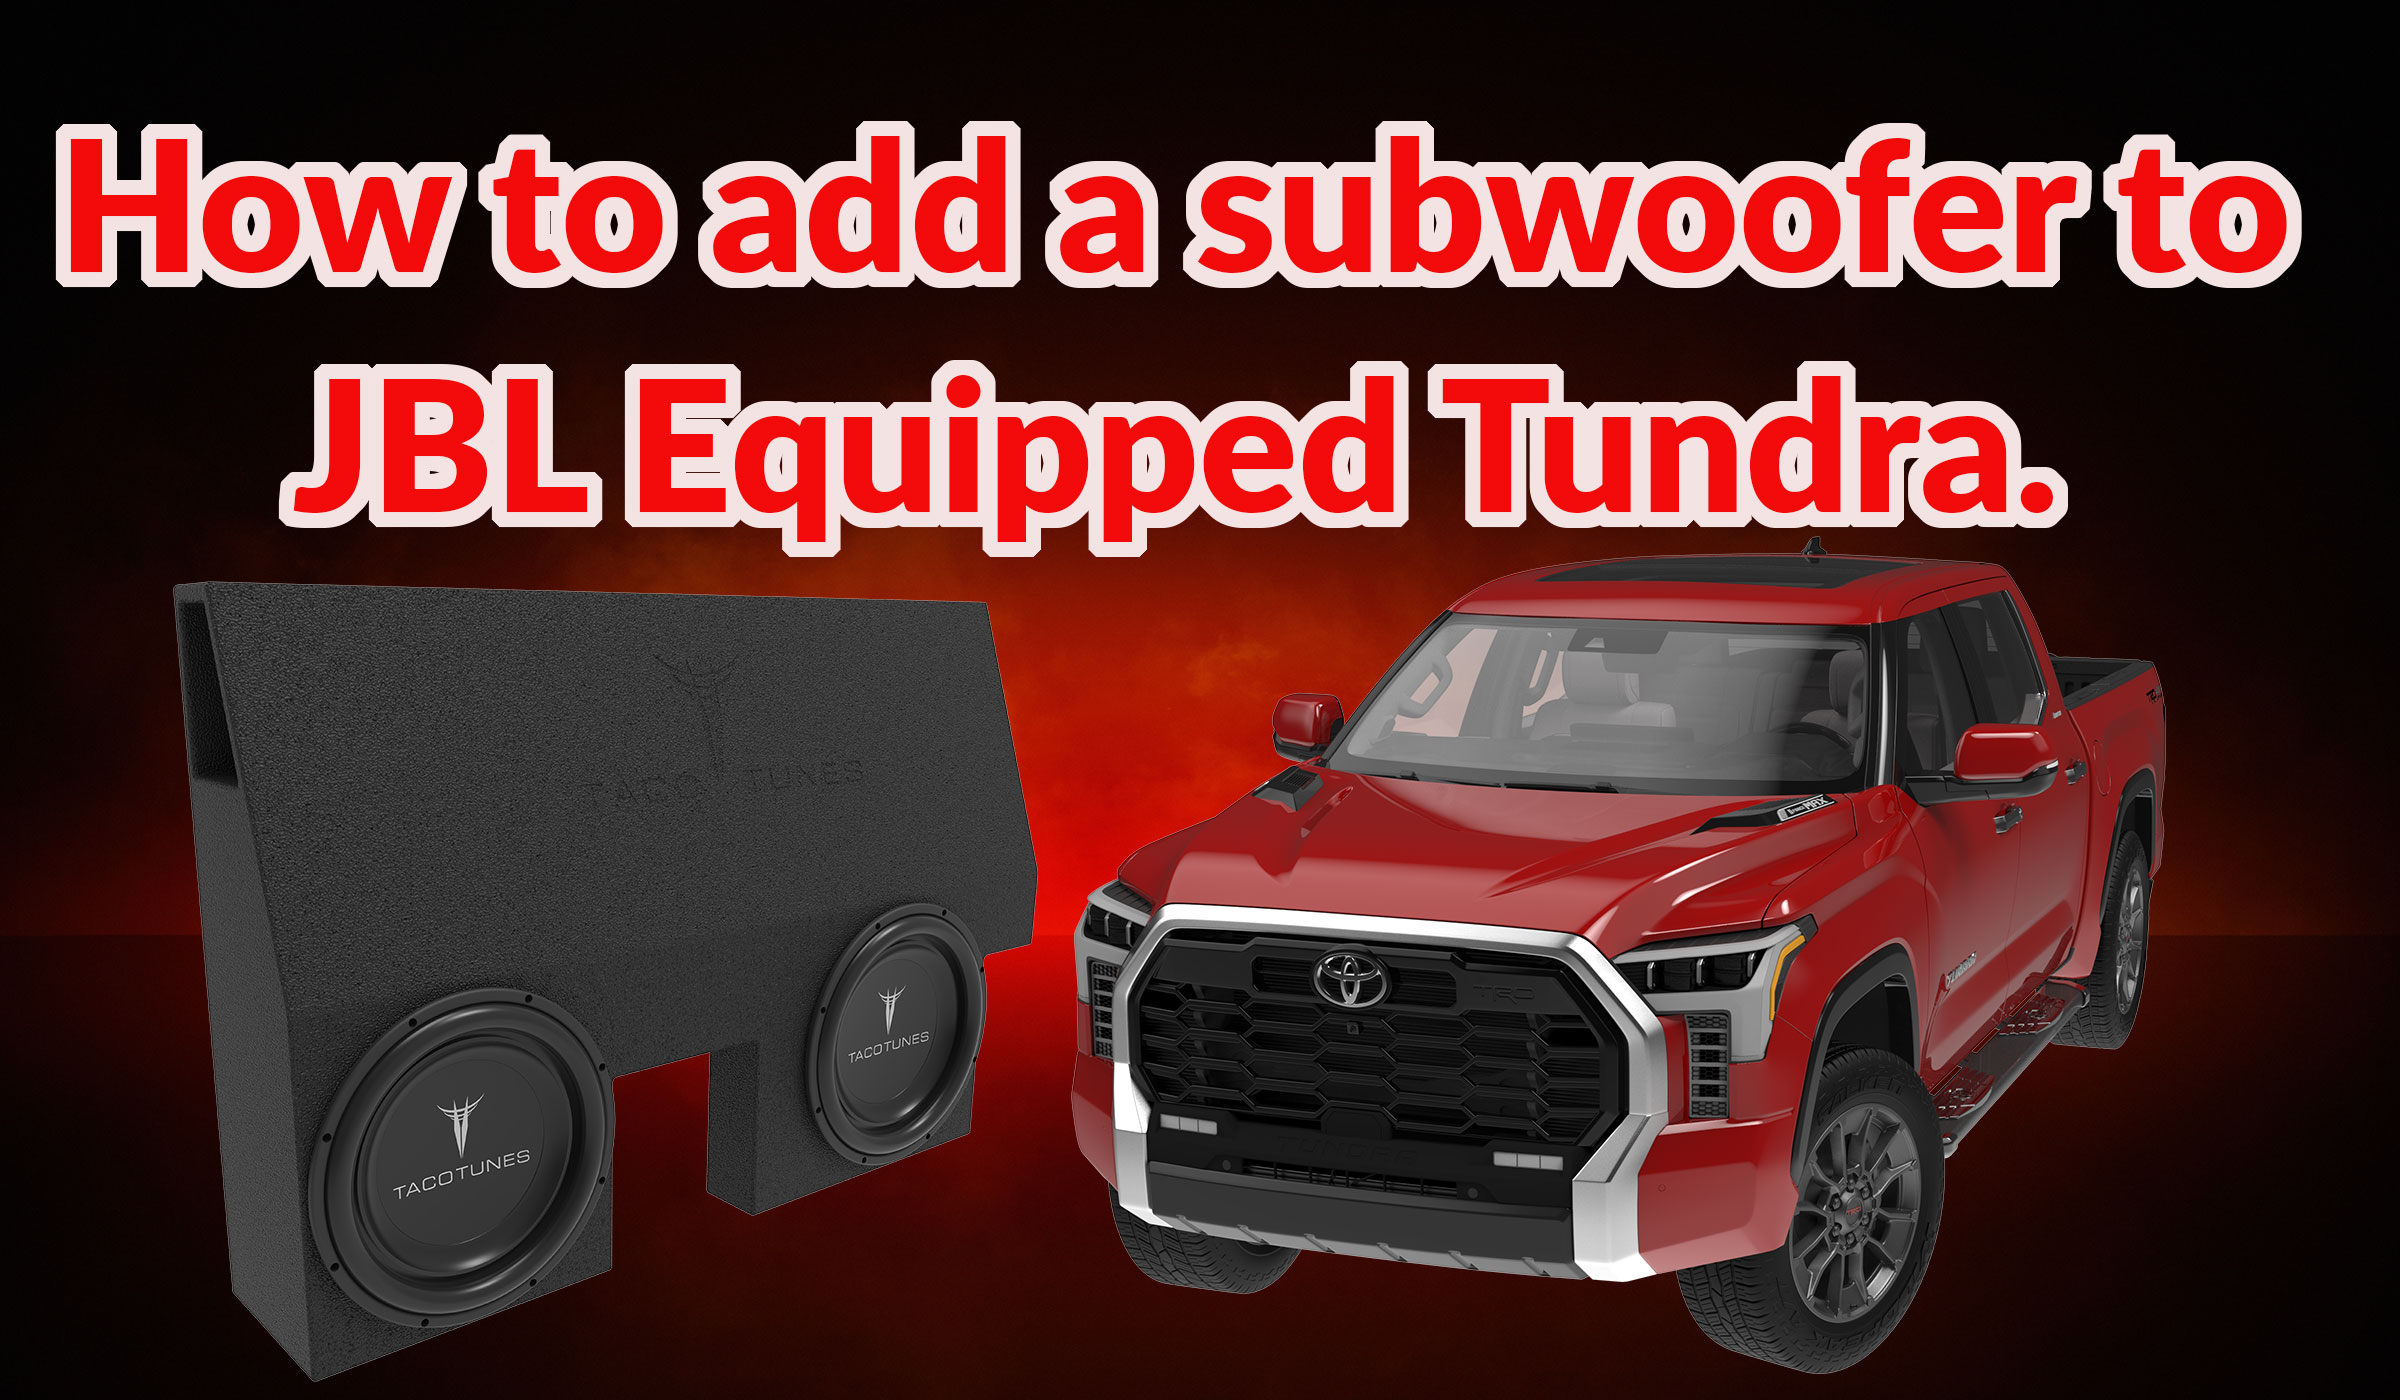 How to add subwoofer to JBL Equipped Toyota Tundra